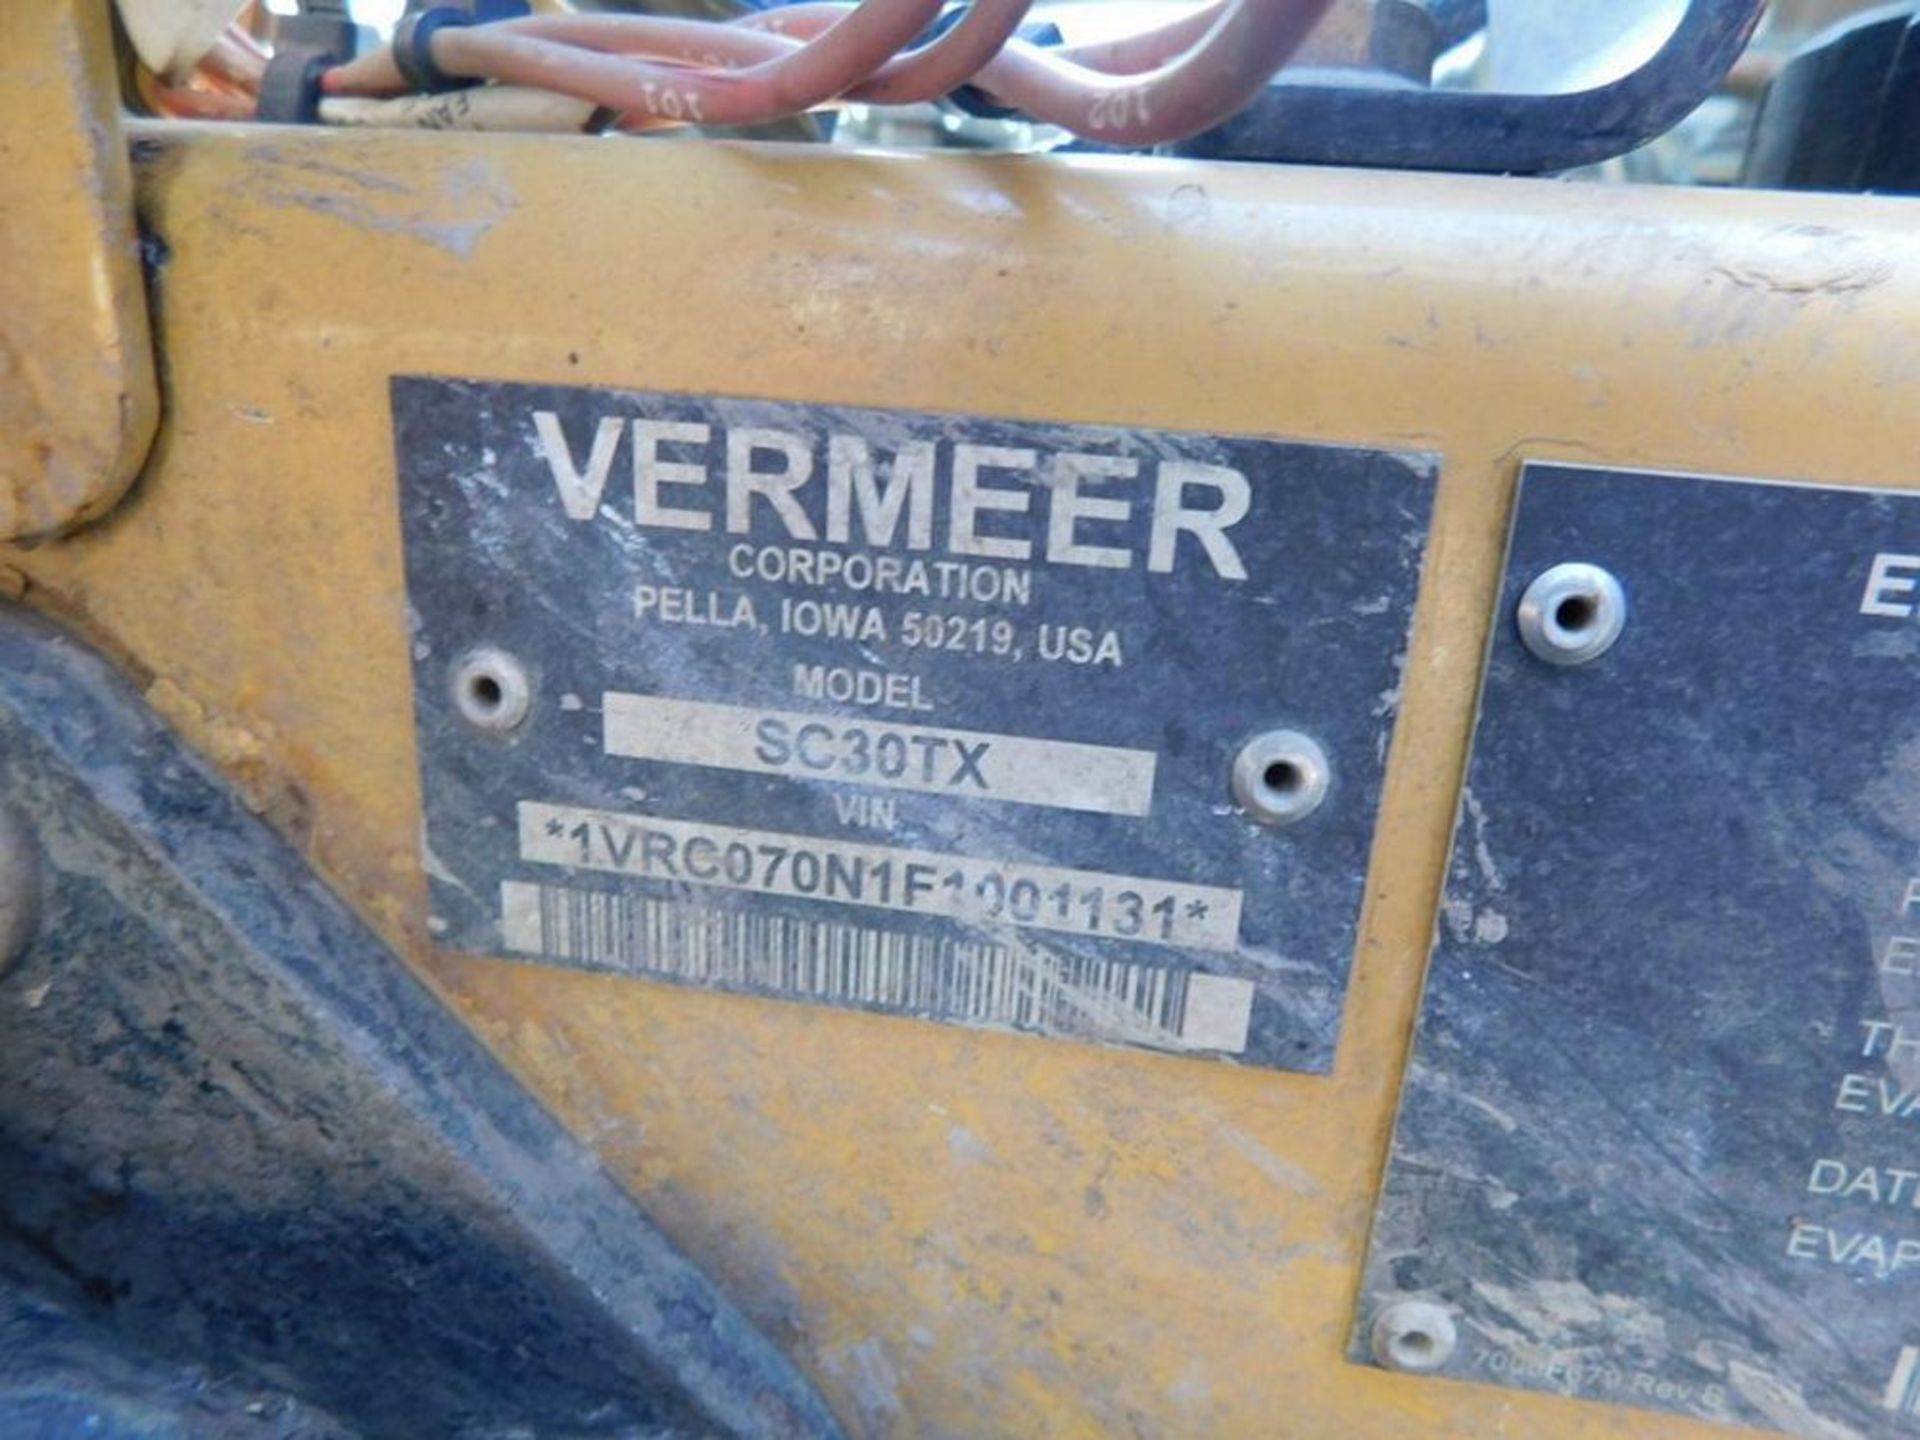 2016 Vermeer SC30 TX Gas Stump Cutter, VIN 1VRC070N1F1001131, 803 Indicated Hours (#1) (LOCATION: - Image 22 of 23